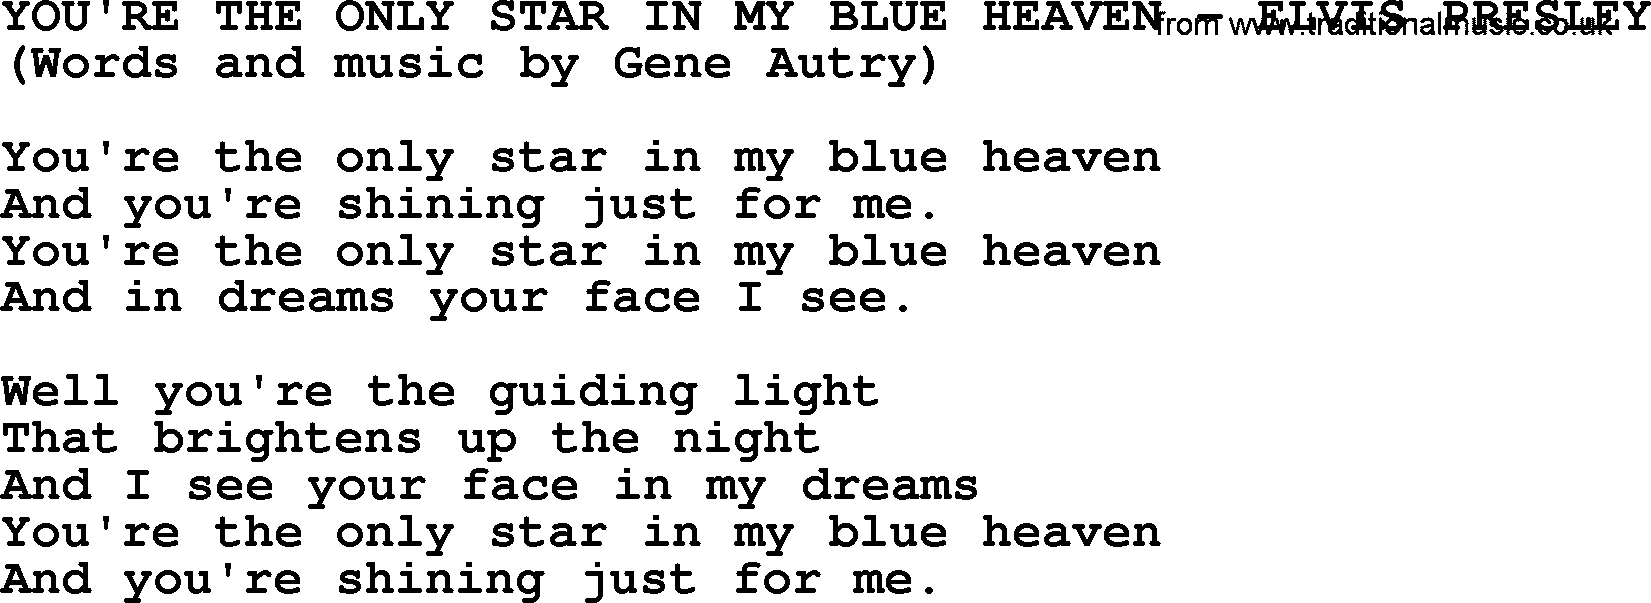 Elvis Presley song: You're The Only Star In My Blue Heaven lyrics